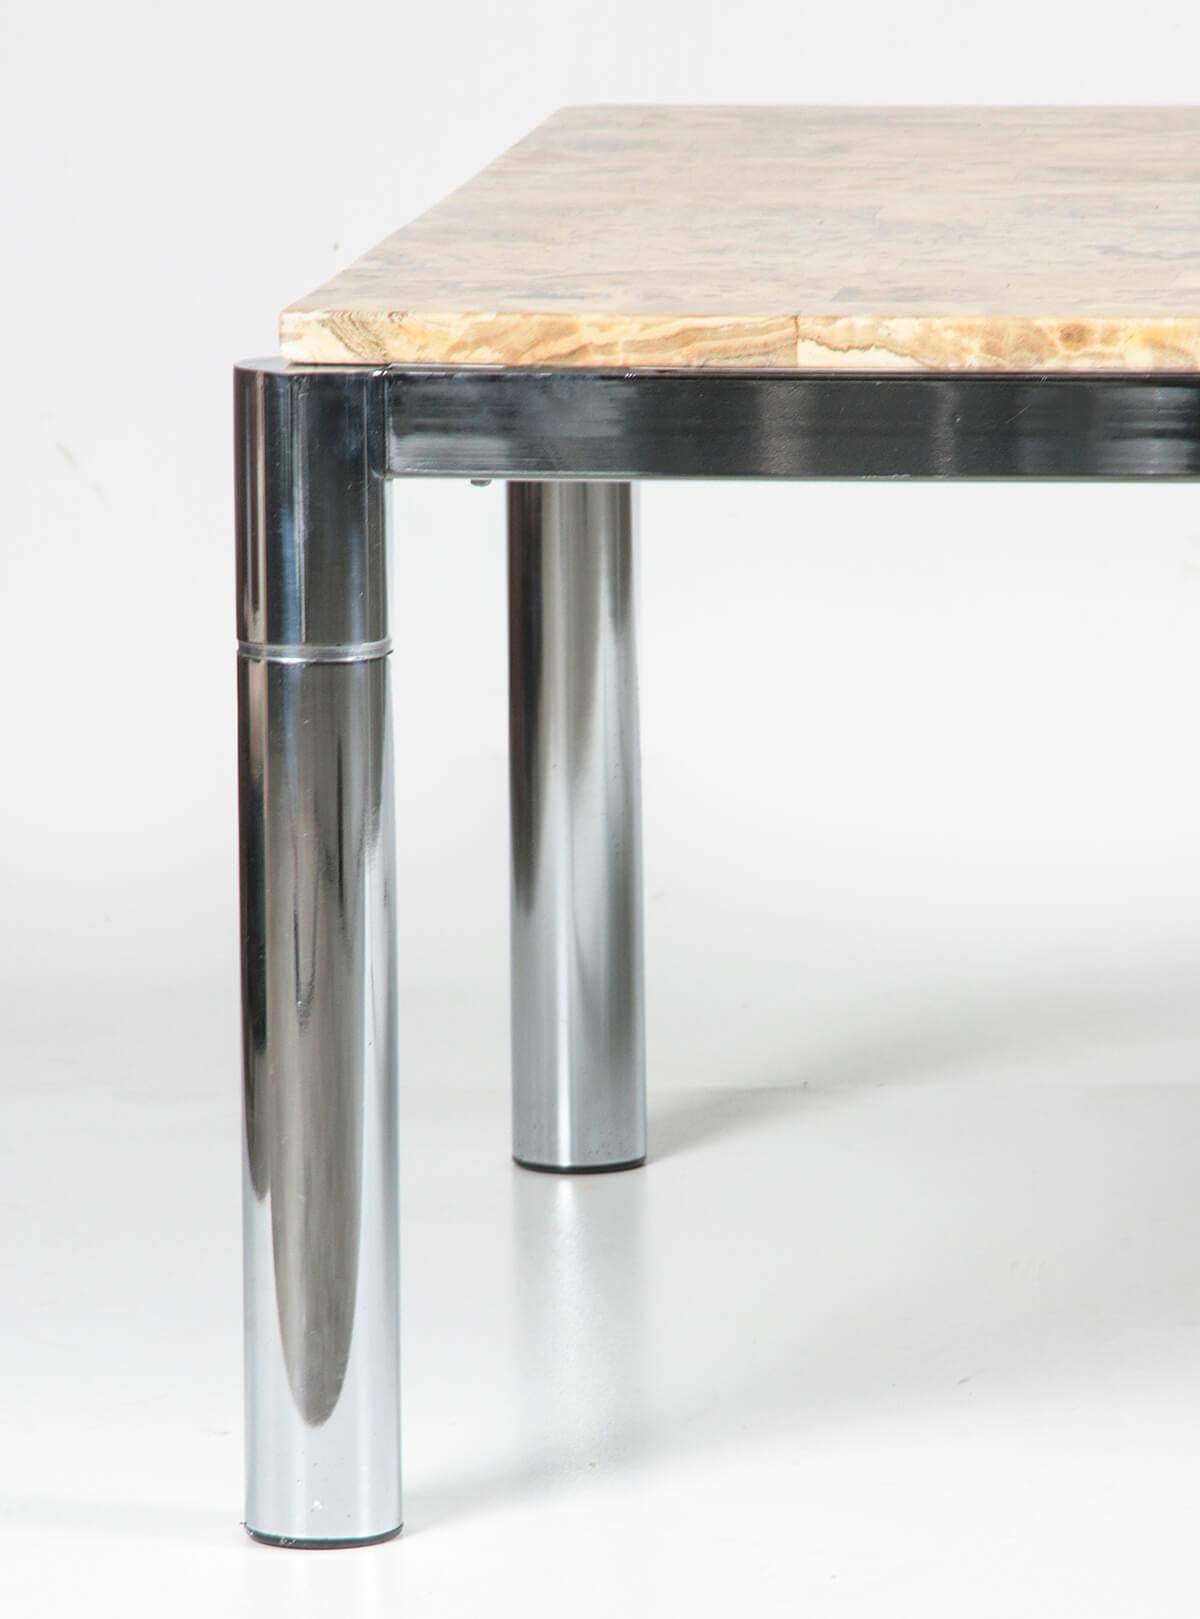 Large Vintage Chromed and Marble Coffee Table Mid-Century Modern Design For Sale 6